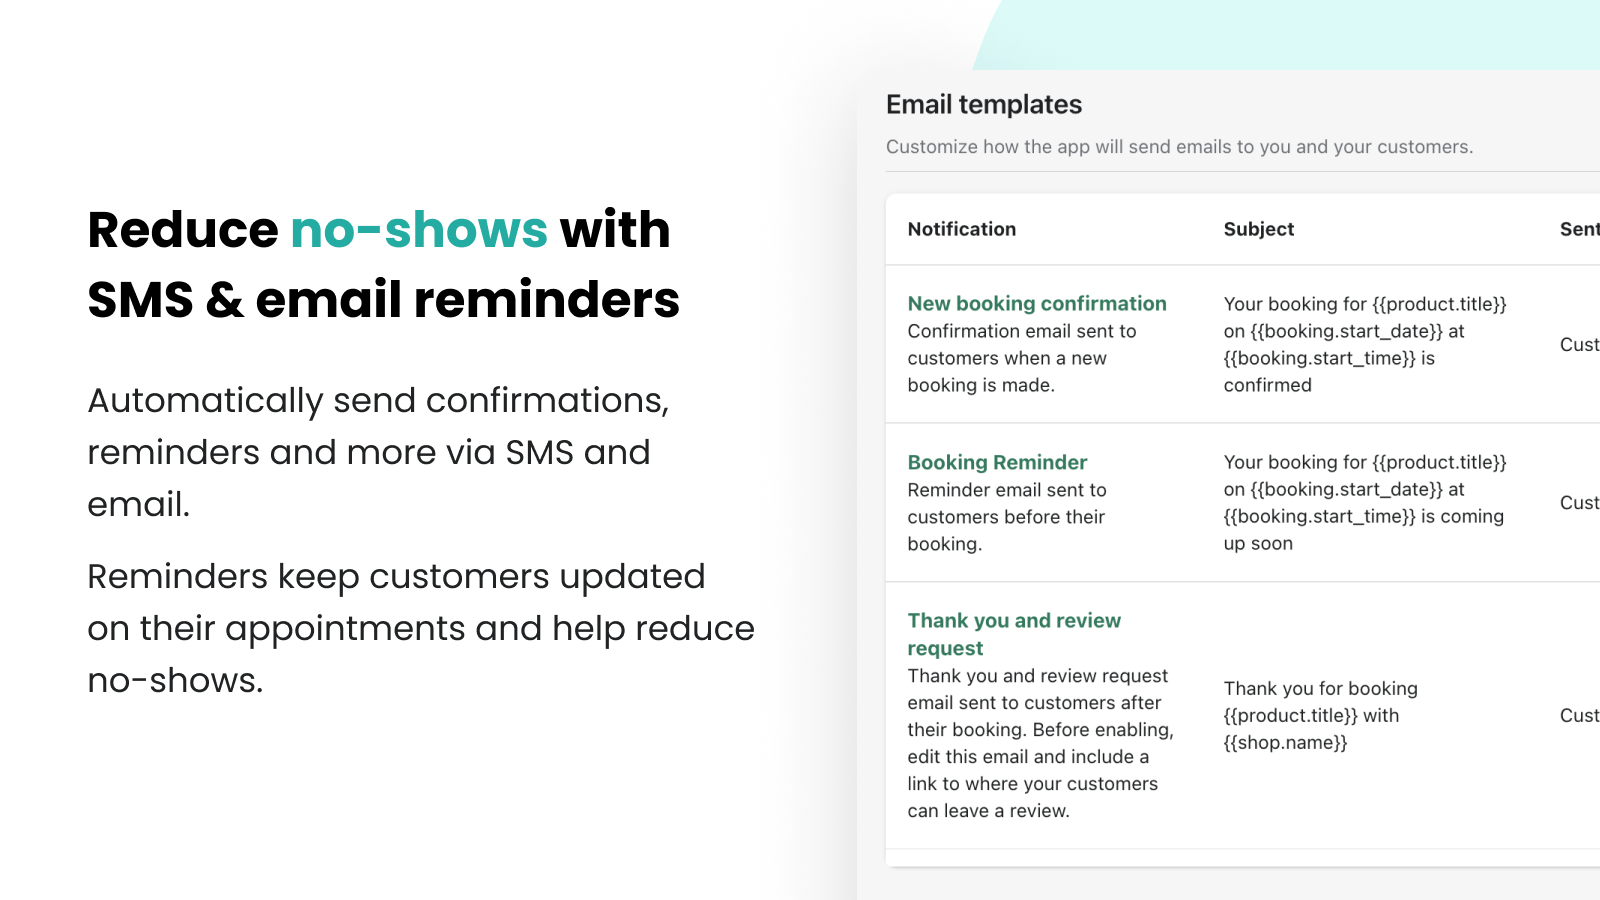 Automatic SMS & email reminders reduce no-shows. 